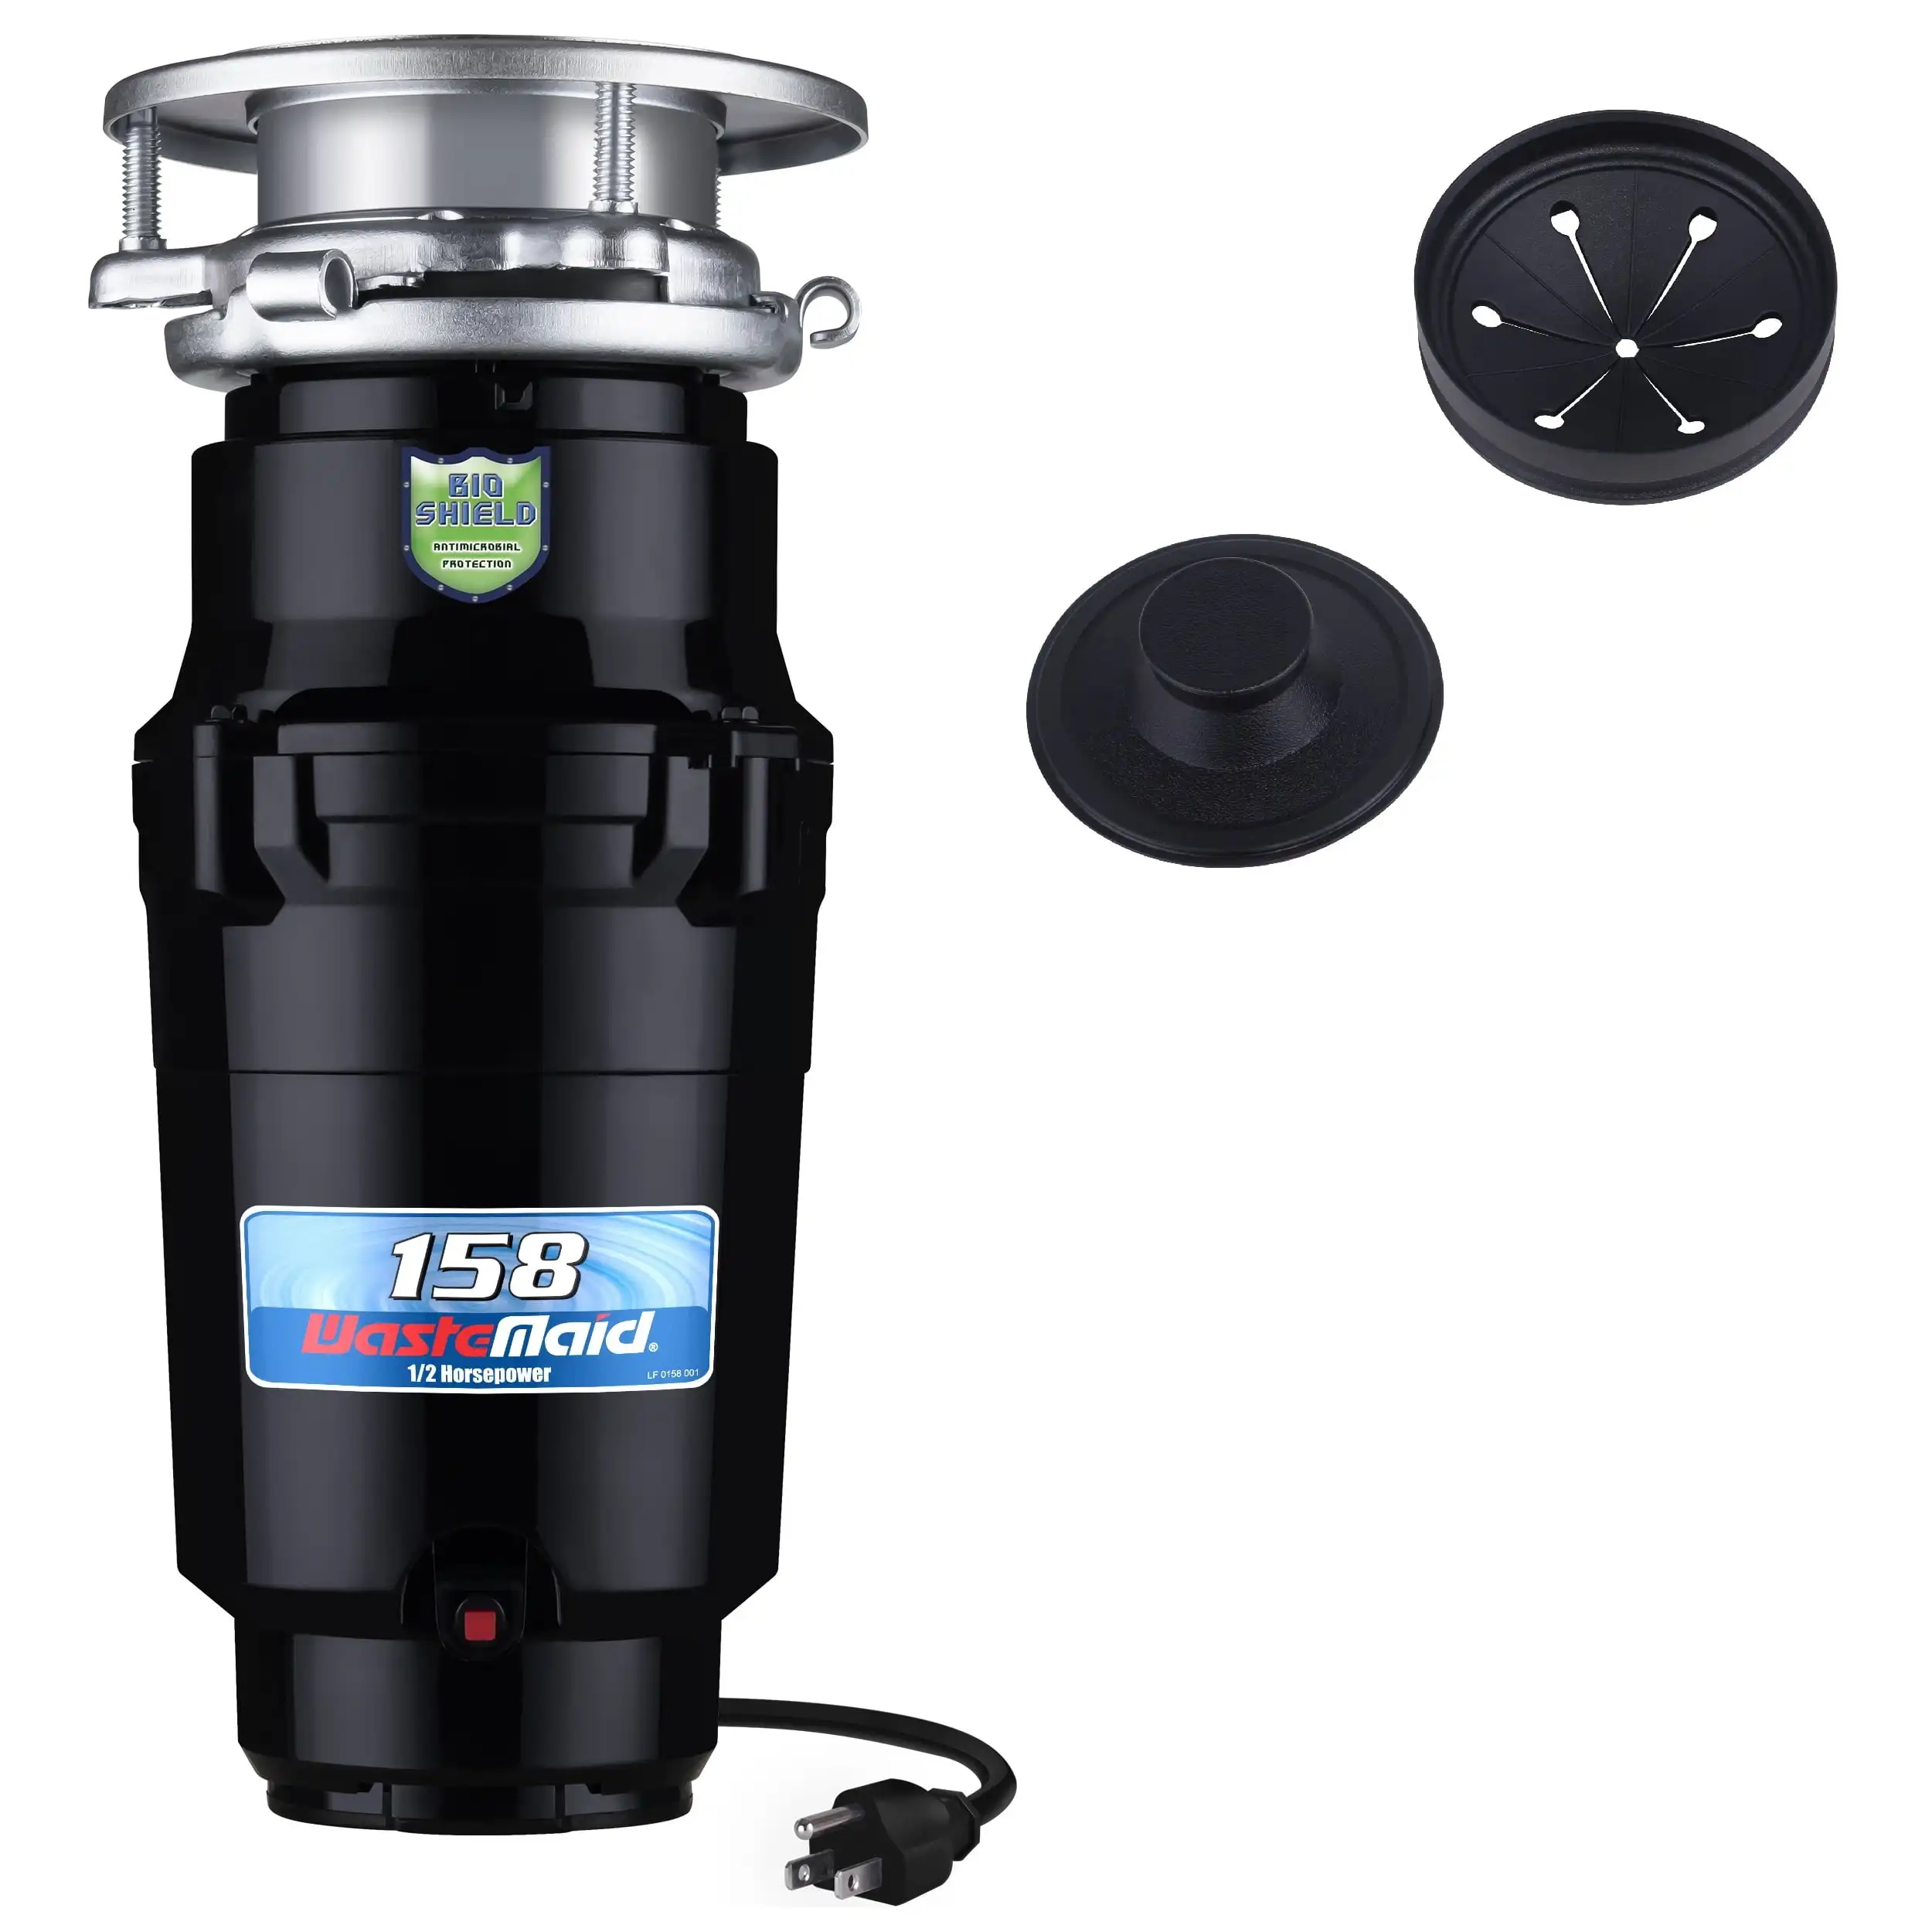 

Waste Maid Standard 1/2 HP Continuous Feed Garbage Disposal 10-US-WM-158-3B